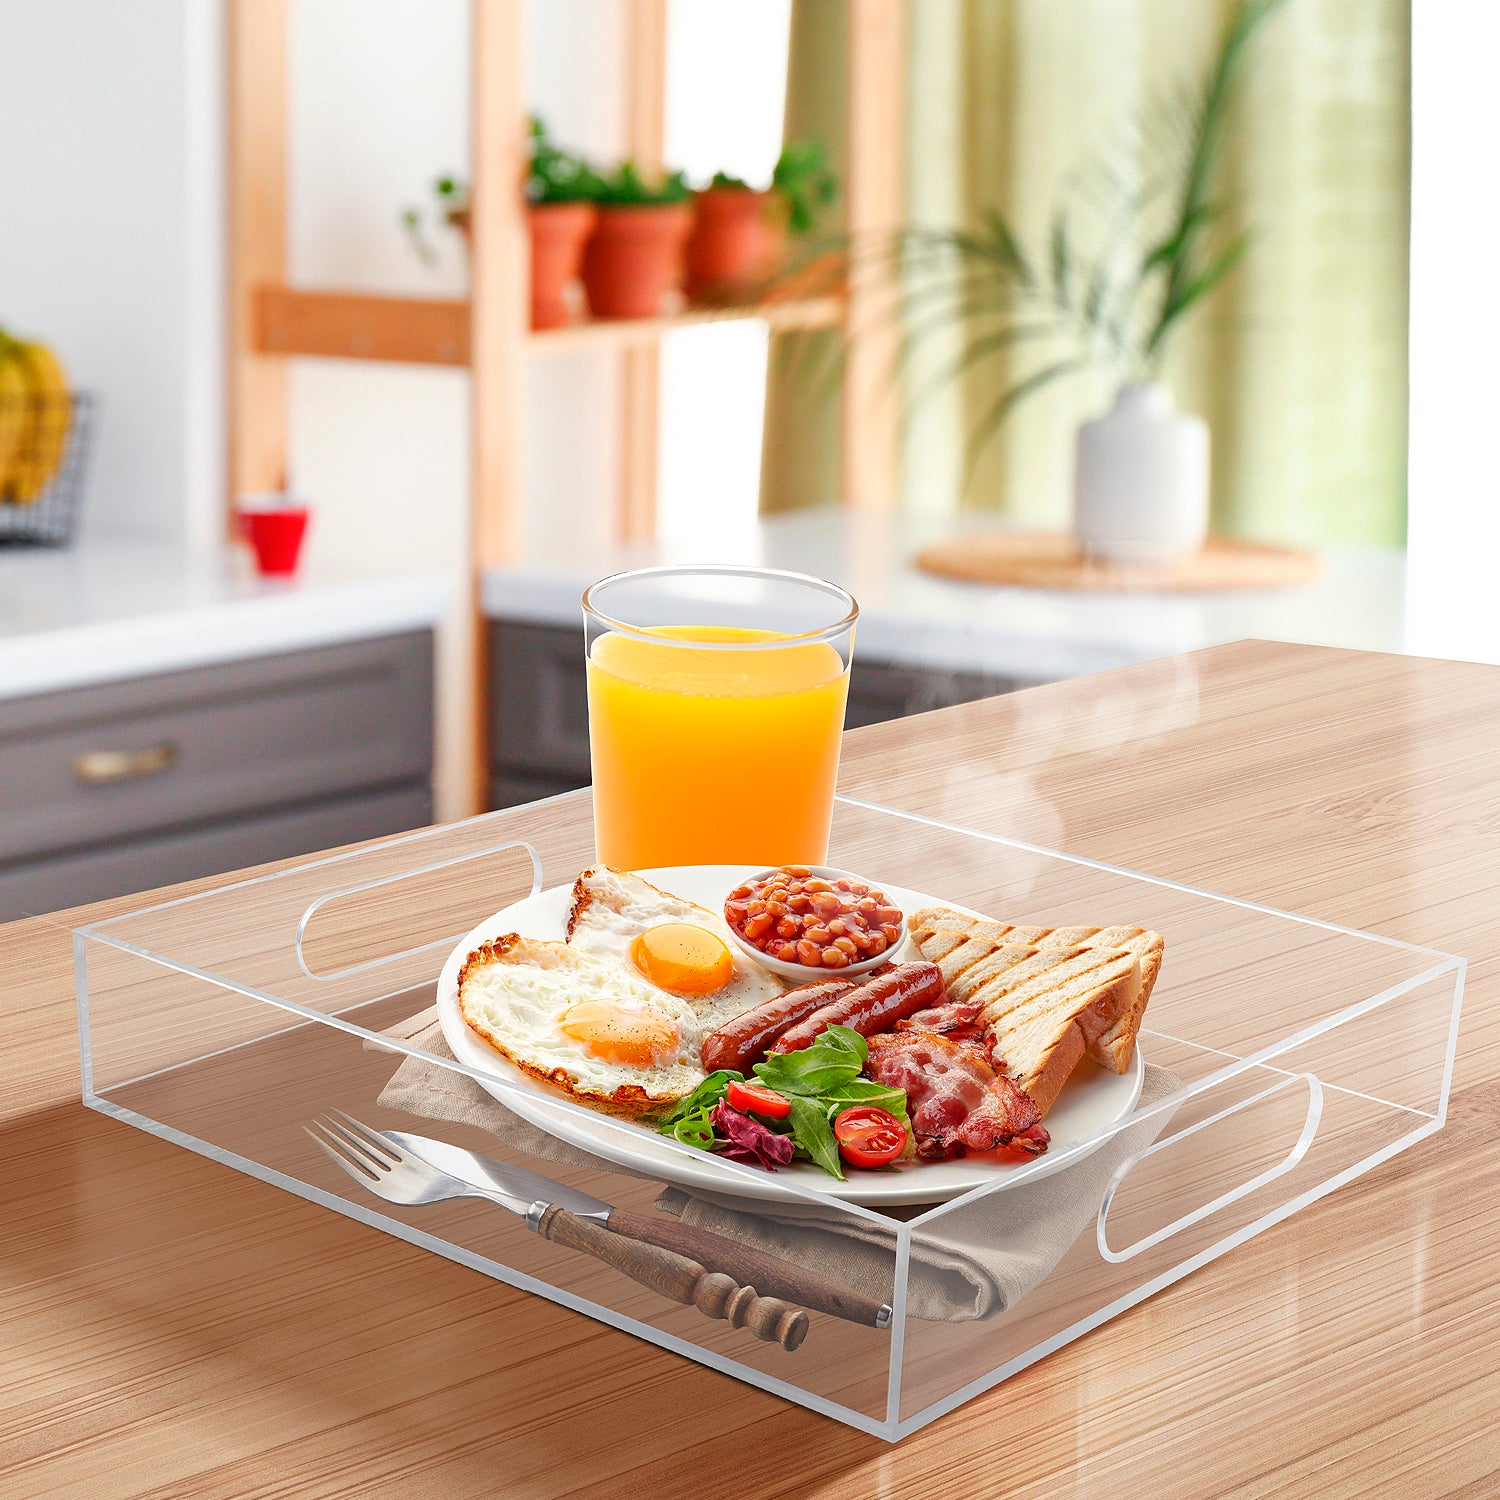 Acrylic Serving Tray (Square)